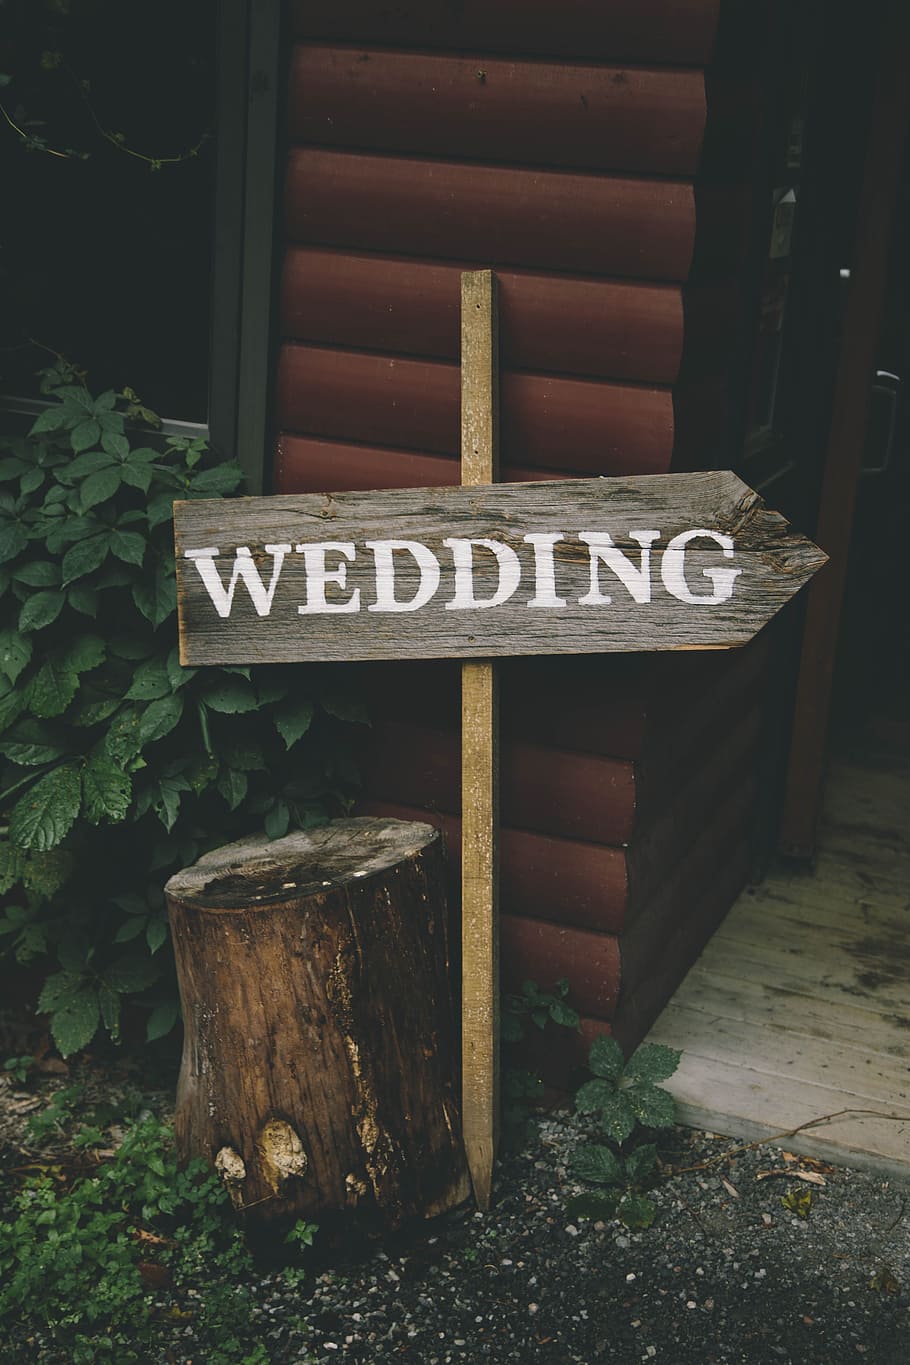 Wedding, Sign, Post, Decoration, sign, post, text, western script, communication, day, outdoors